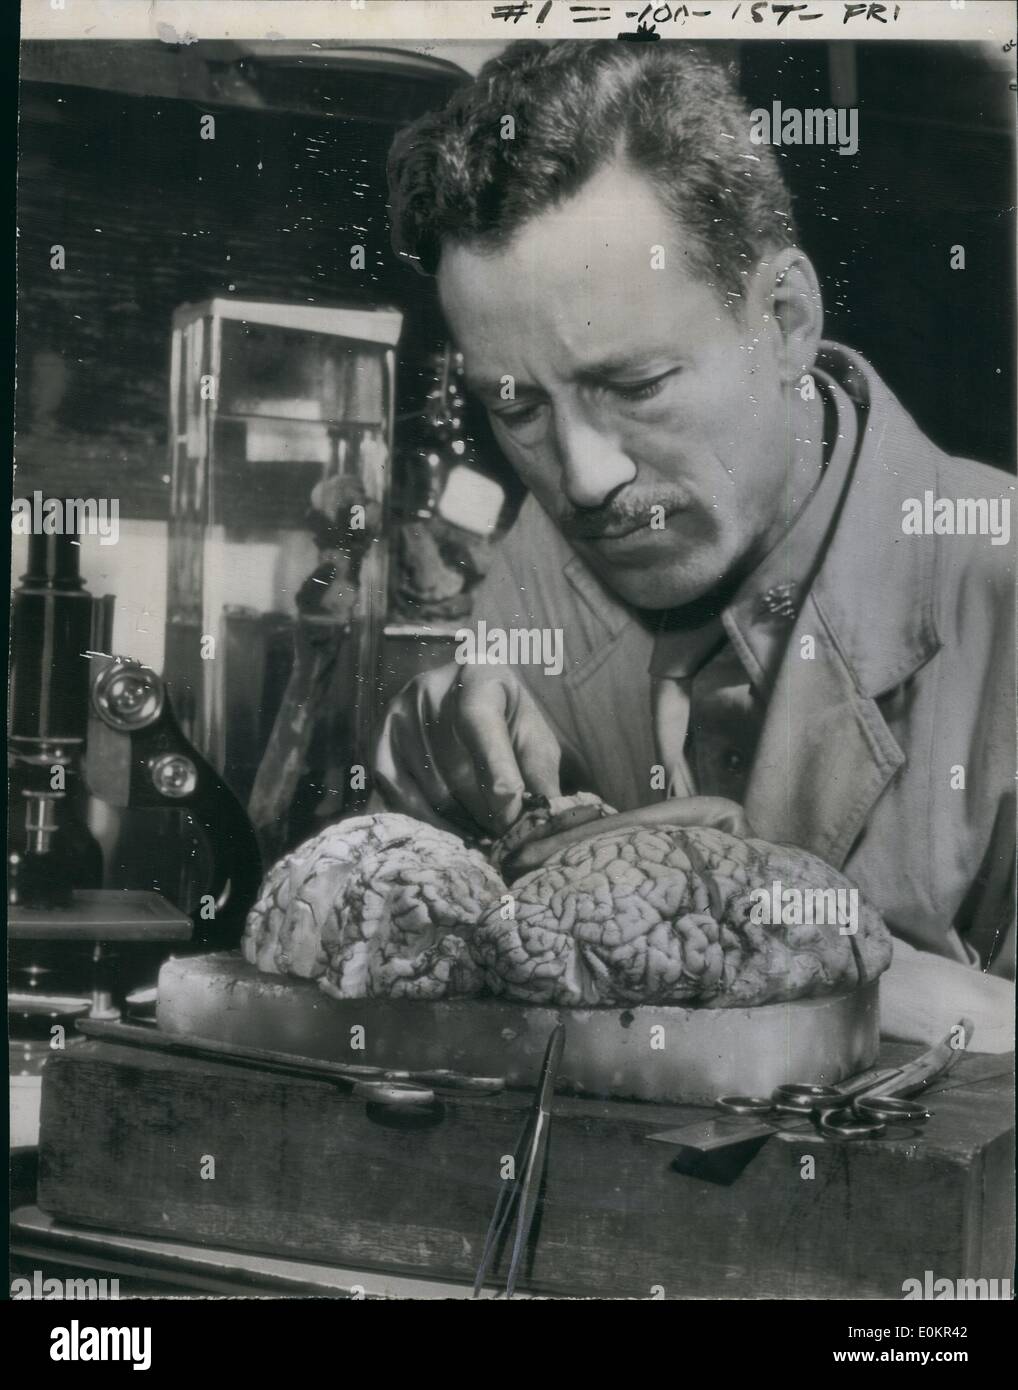 Jan. 01, 1946 - Army Doctor Studies Ley's Brain: Major Webb haymaker, Neuropathologist of the Army Institute of Pathology, conducts post-mortem examination of brain of Dr. Robert Ley, Nazi leader who committed suicide. The Brain was flown to the U.S. from Germany for the examination, which disclosed that Ley had a long standing disease of the brain ''sufficient...to have impaired (his), mental and emotional faculties. Stock Photo